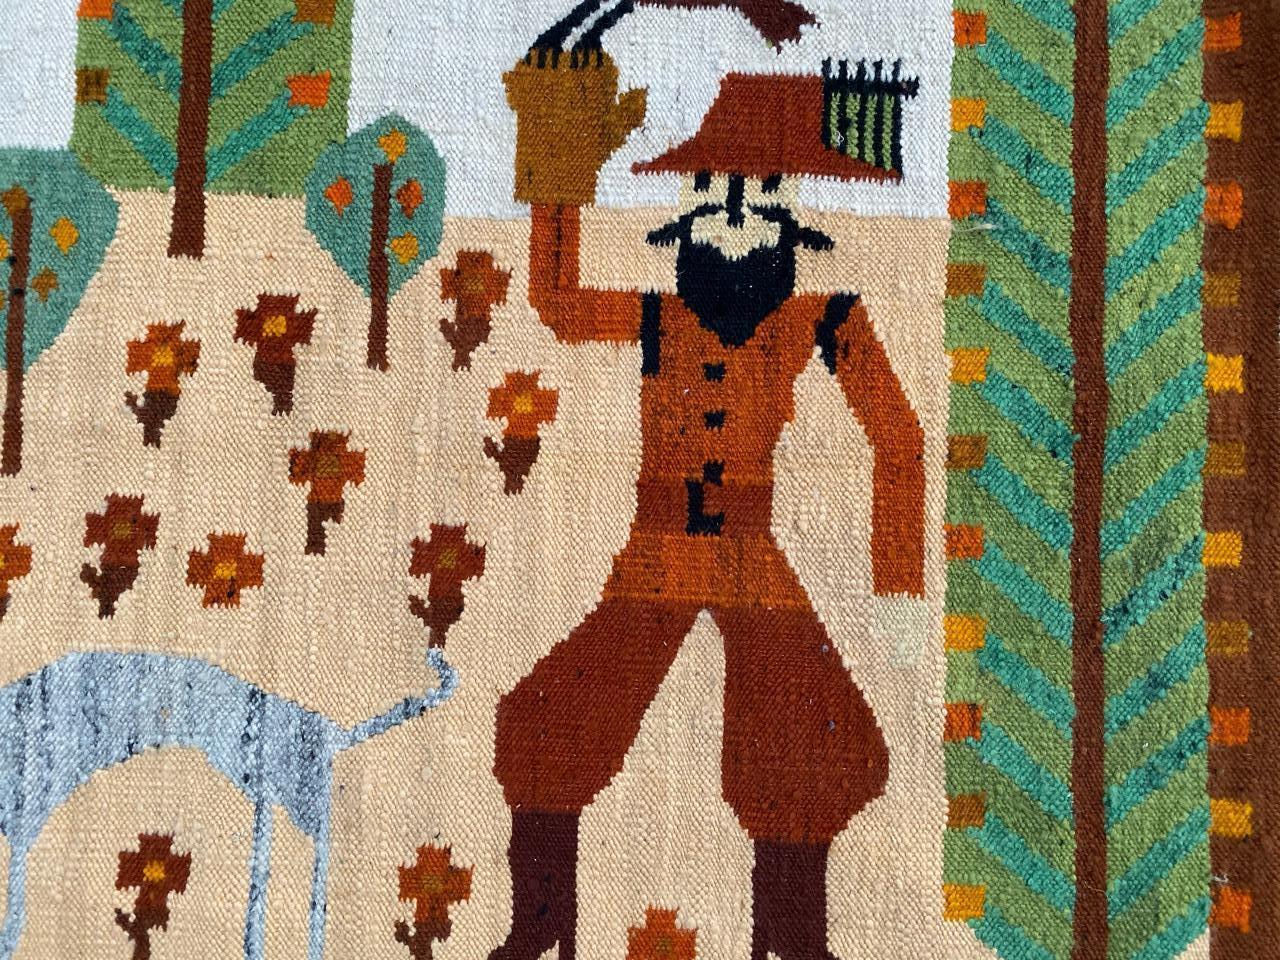 Very beautiful midcentury flat tapestry with beautiful rustic design and nice colors with yellow, green, orange and brown, entirely handwoven with wool on cotton foundation.